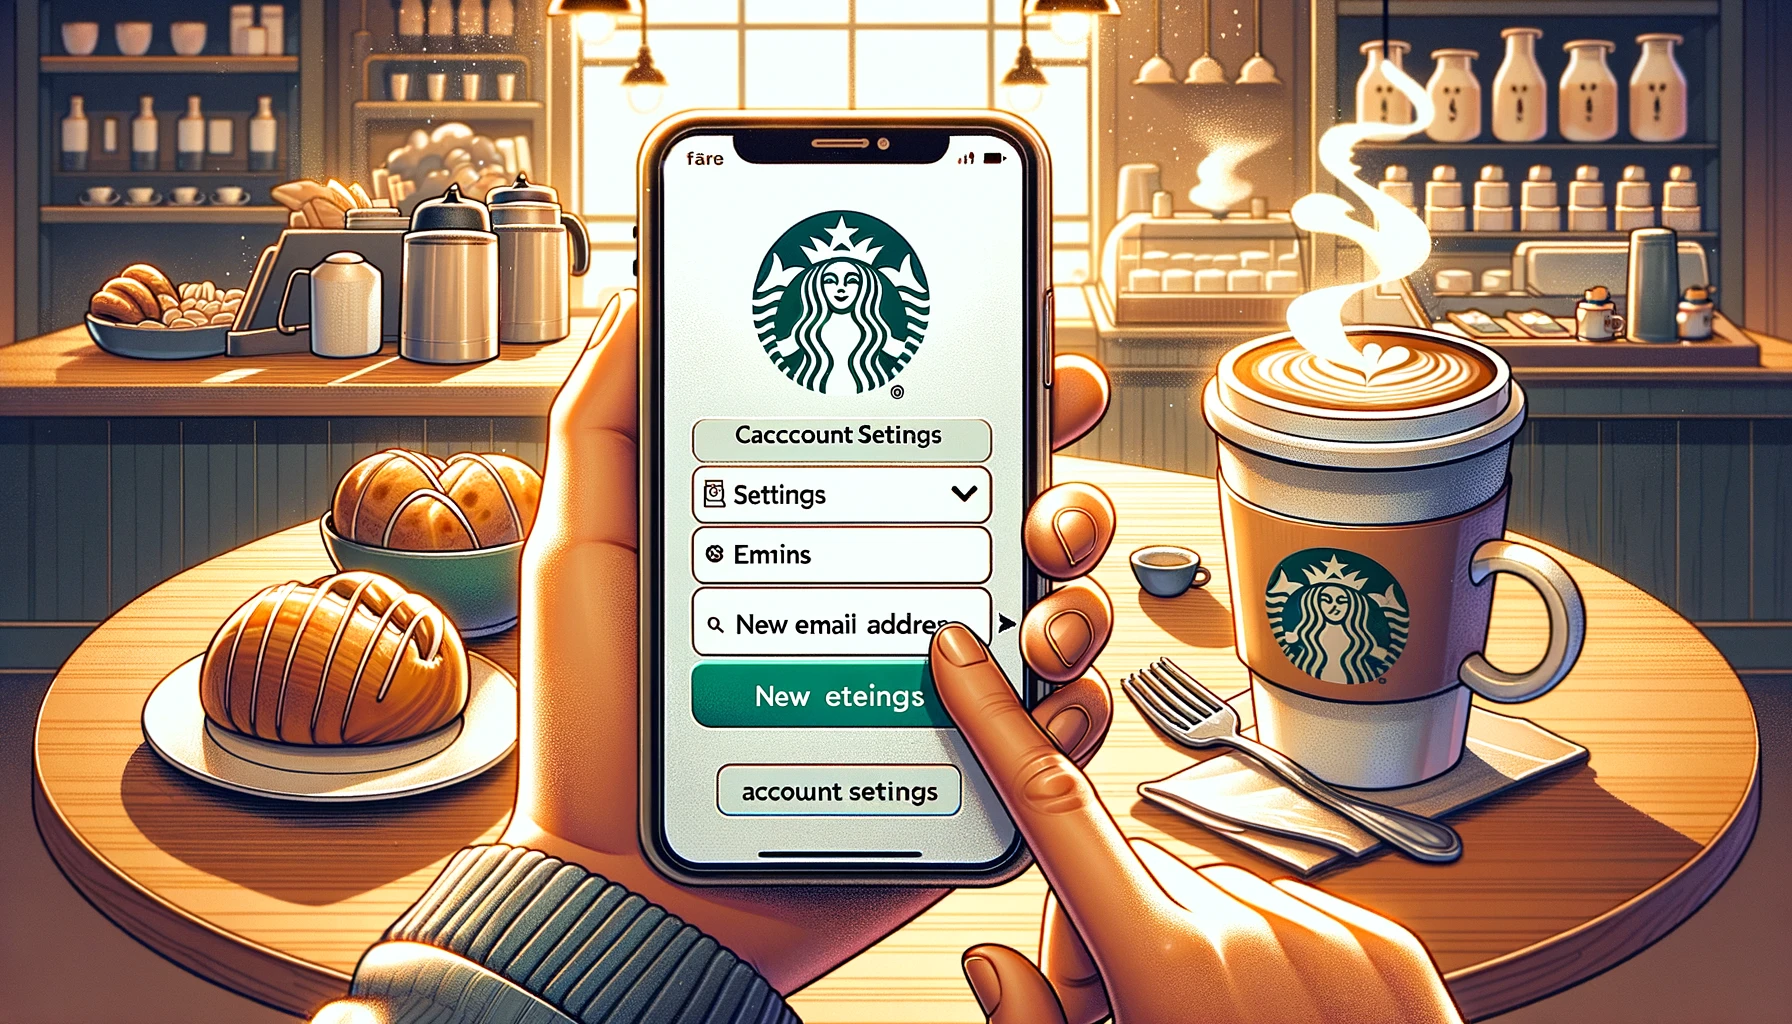 How to Change Email on Starbucks App